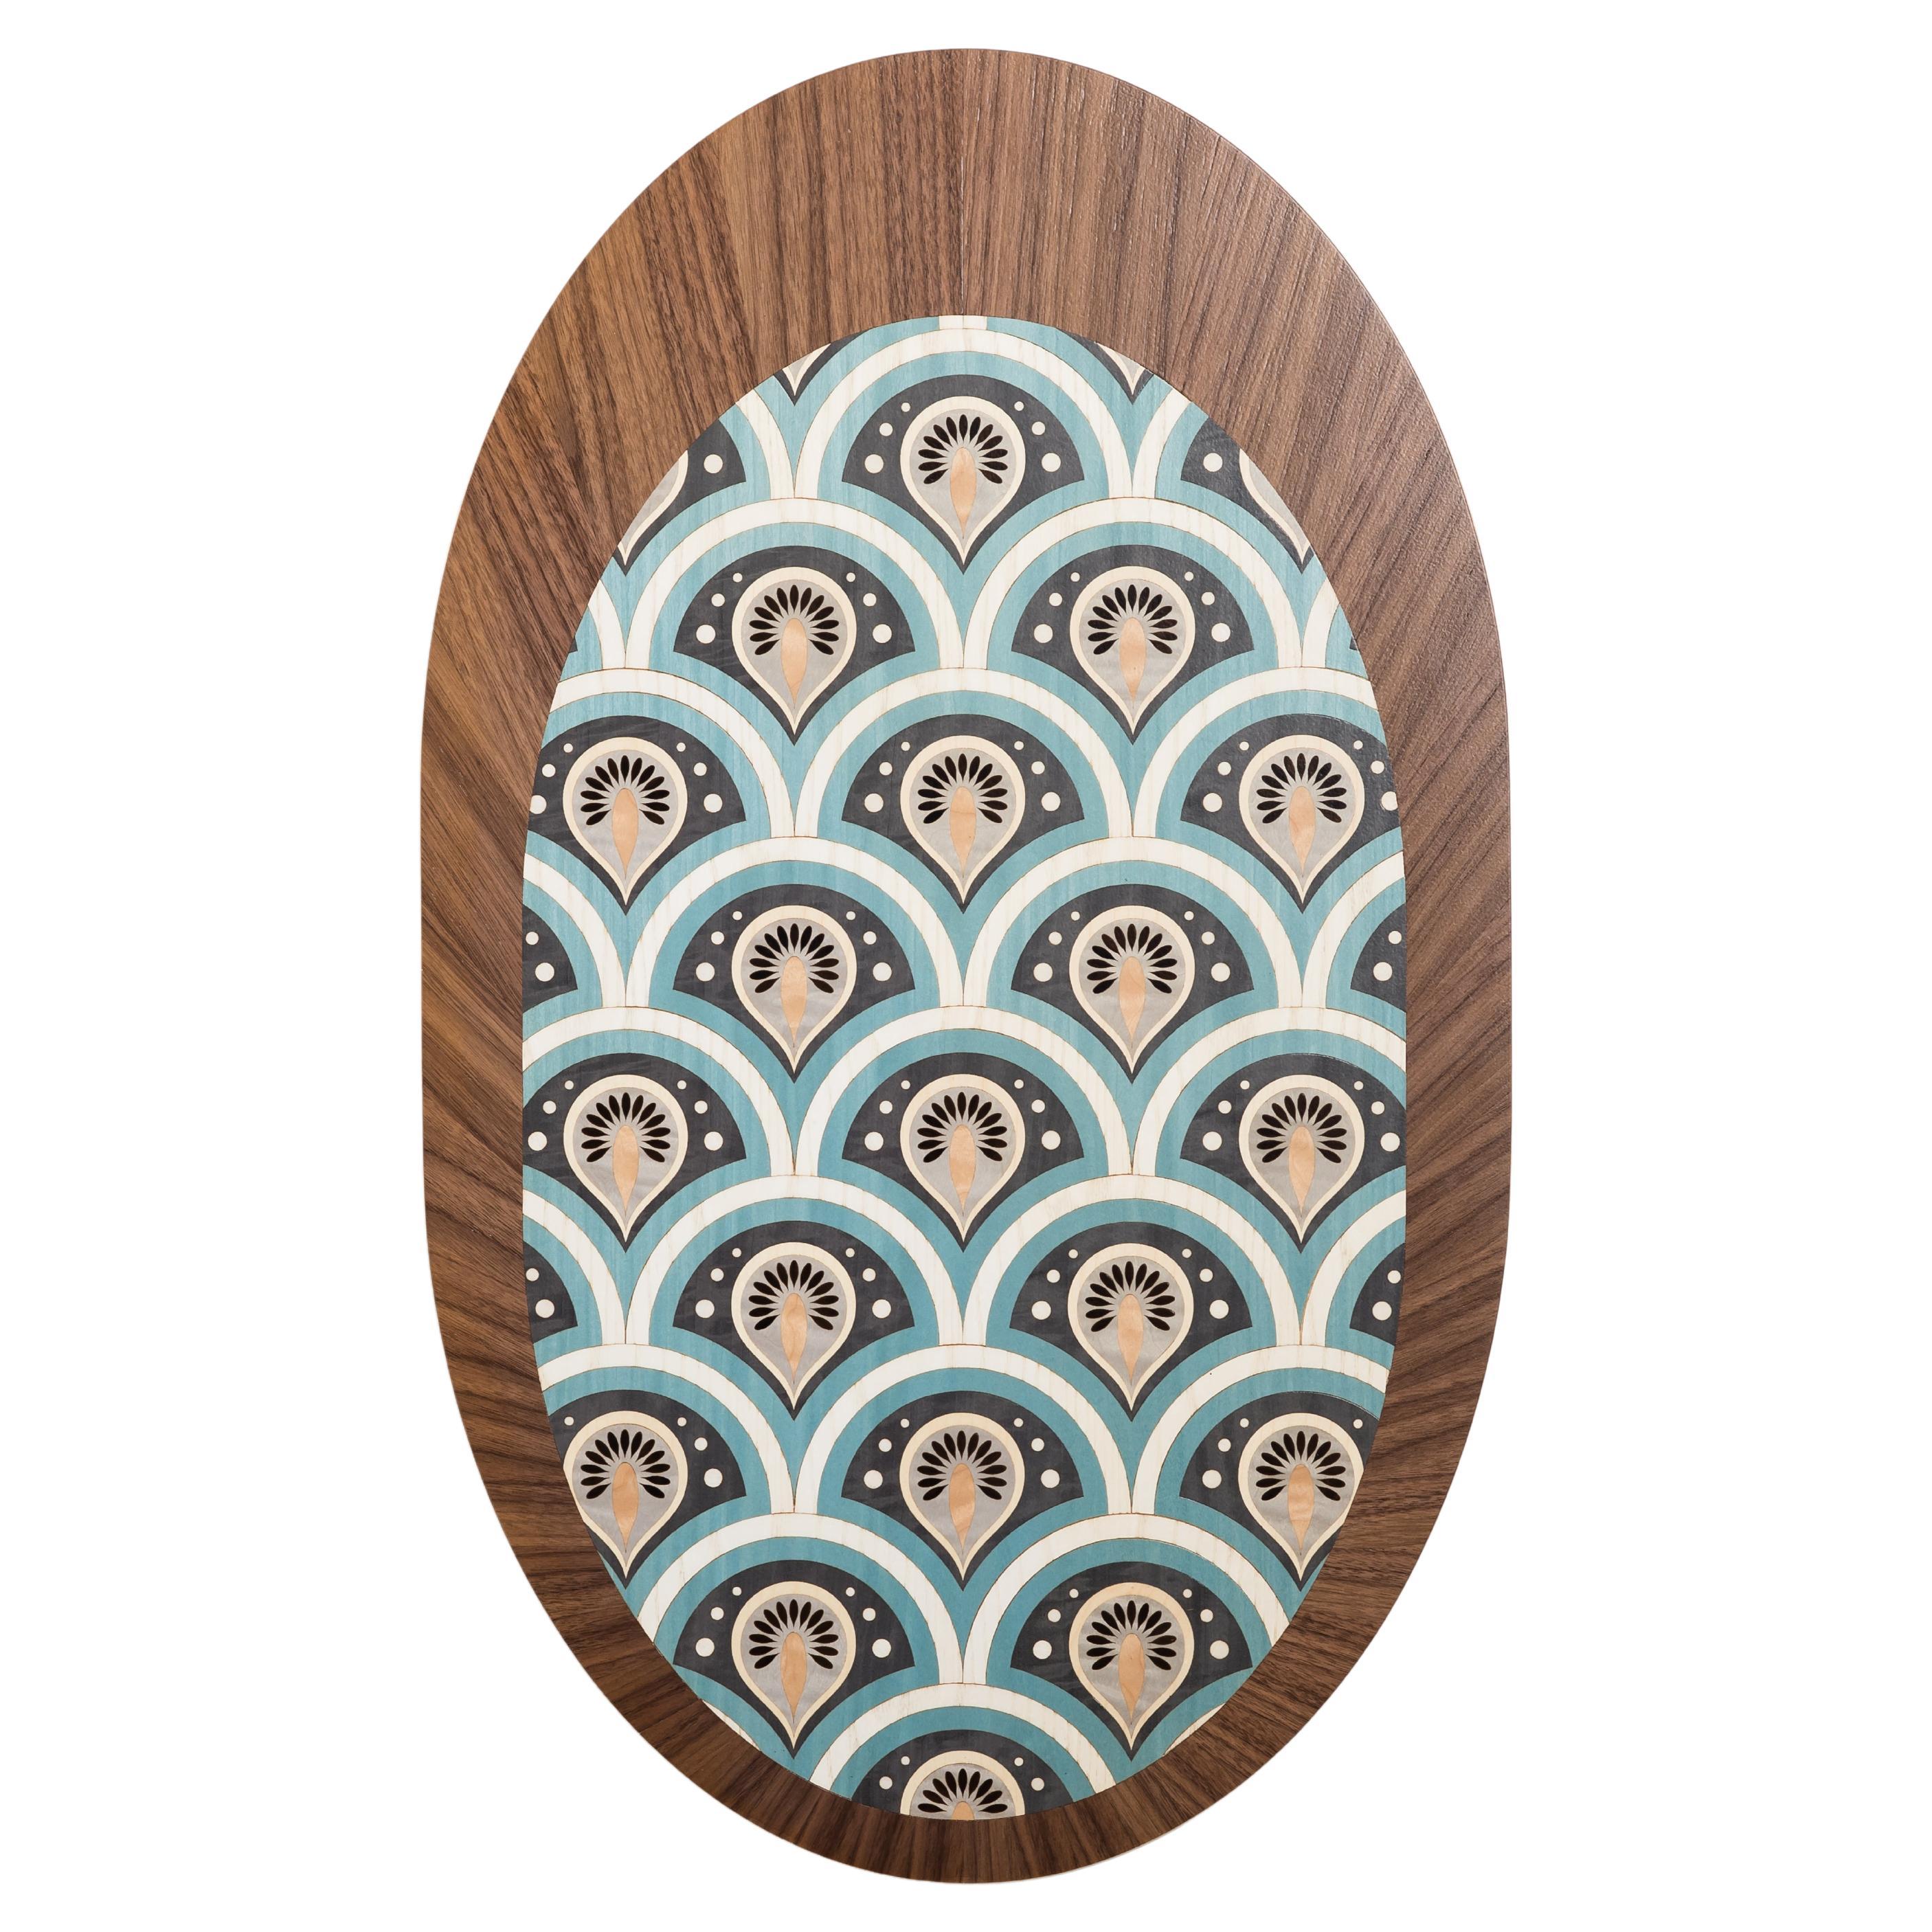 Each w o o d p o p balance board is meticulously handcrafted in our Black Mountains workshop in the UK.  Doubling up as an integral part of any fitness regime - and a unique standalone artwork.

Each board features a unique marquetry design